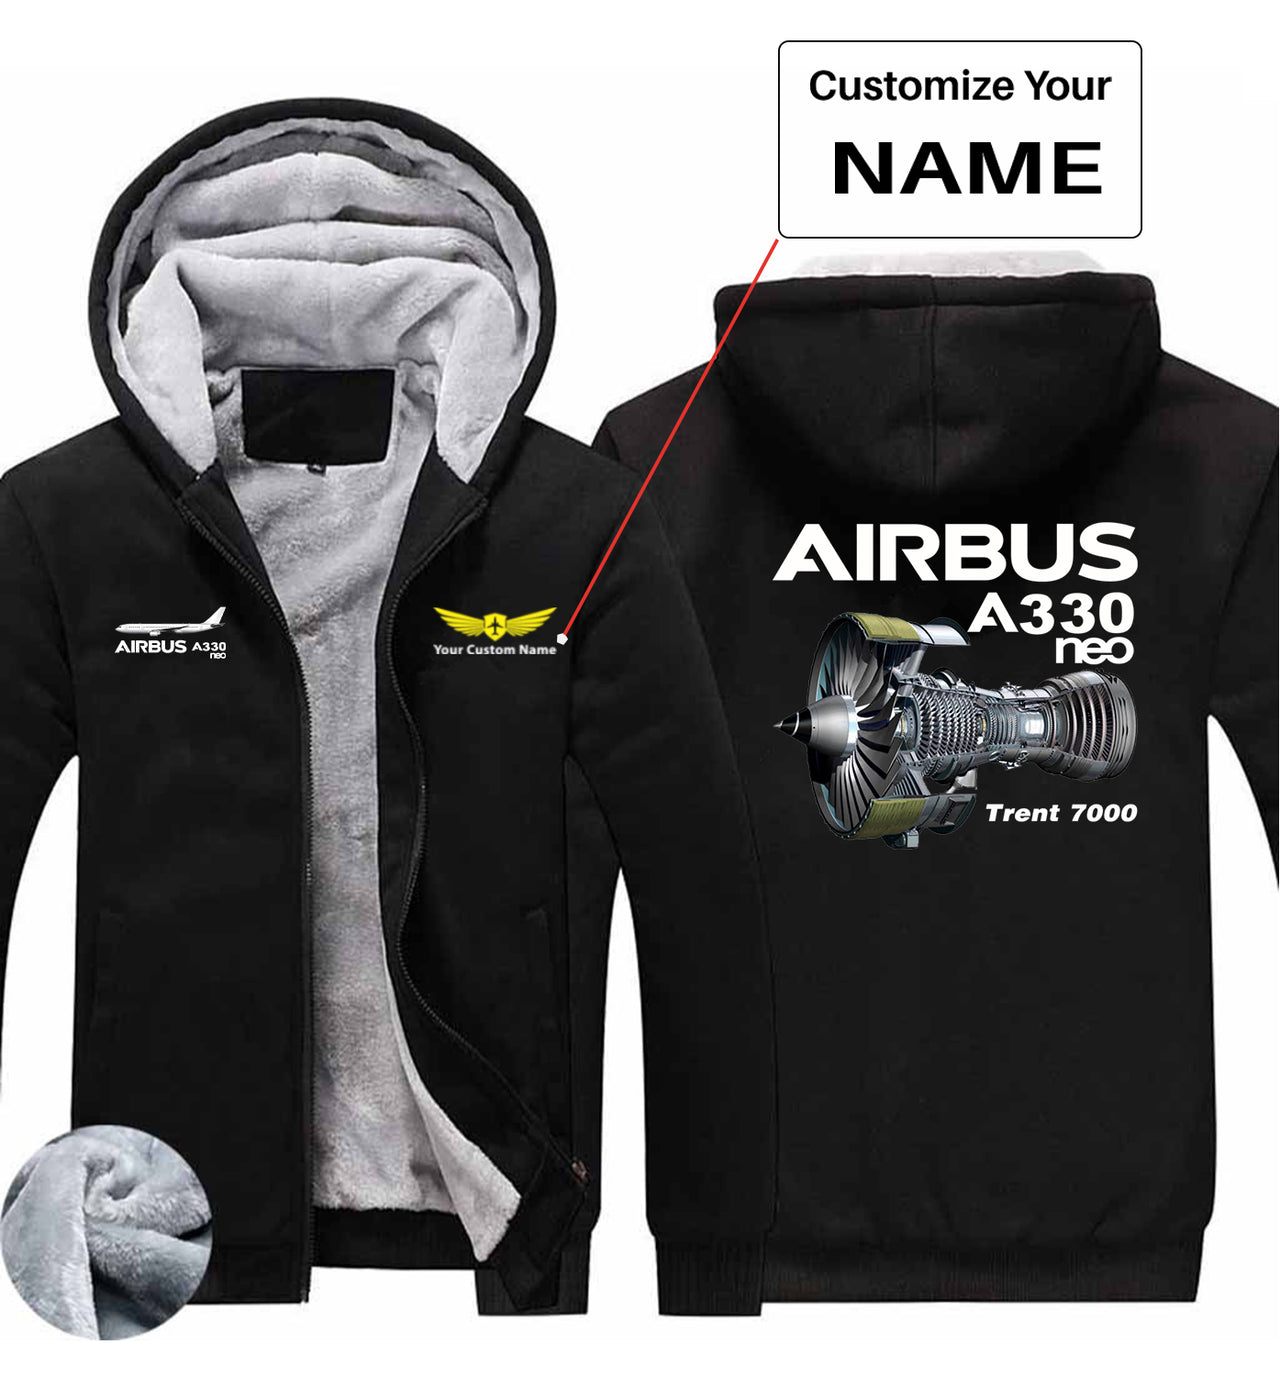 The Airbus A330neo Designed Zipped Sweatshirts